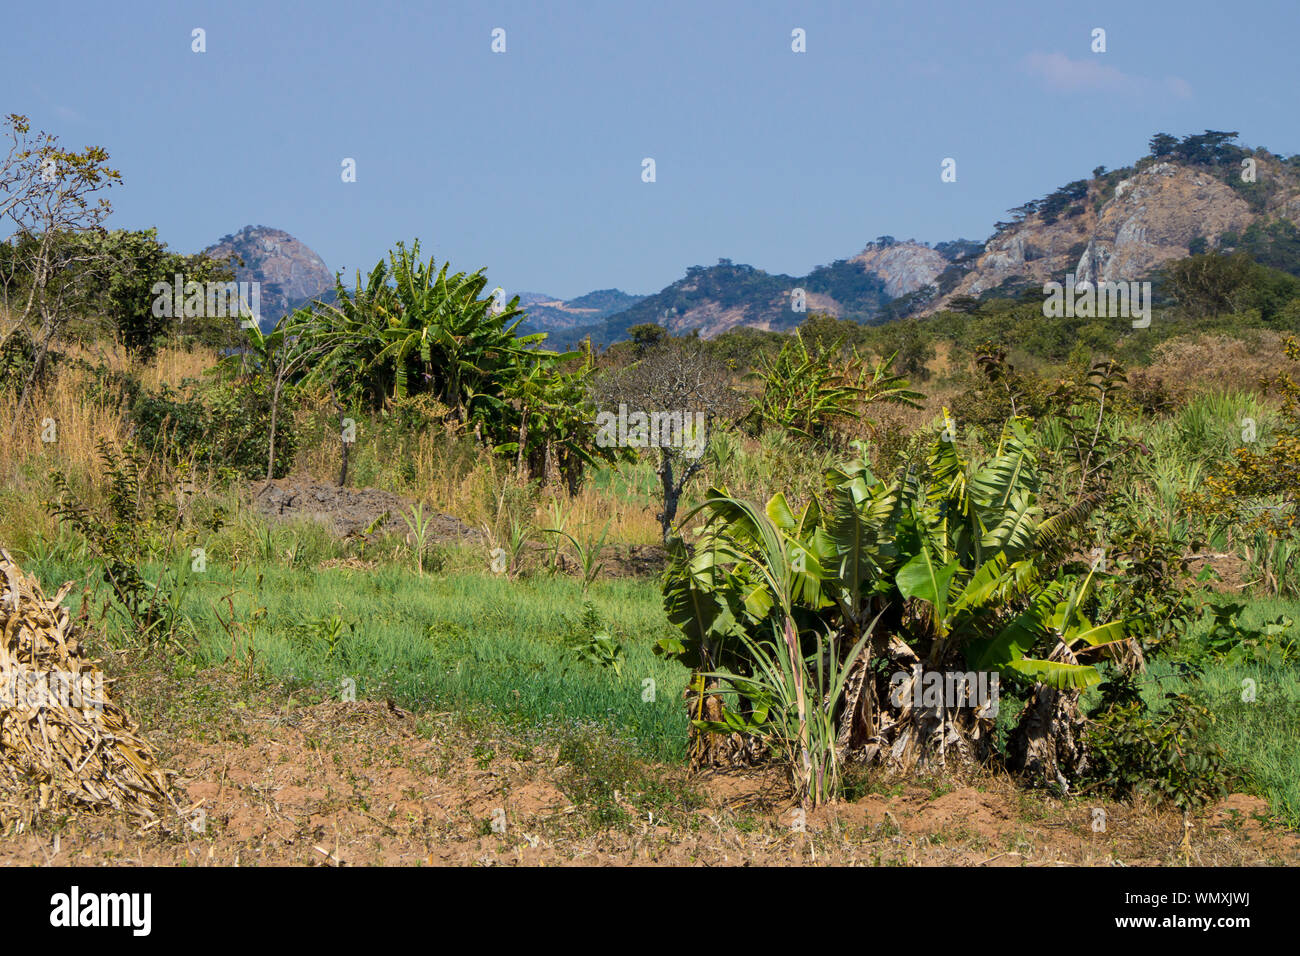 Agricultural landscape in Mzimba district, Malawi Stock Photo